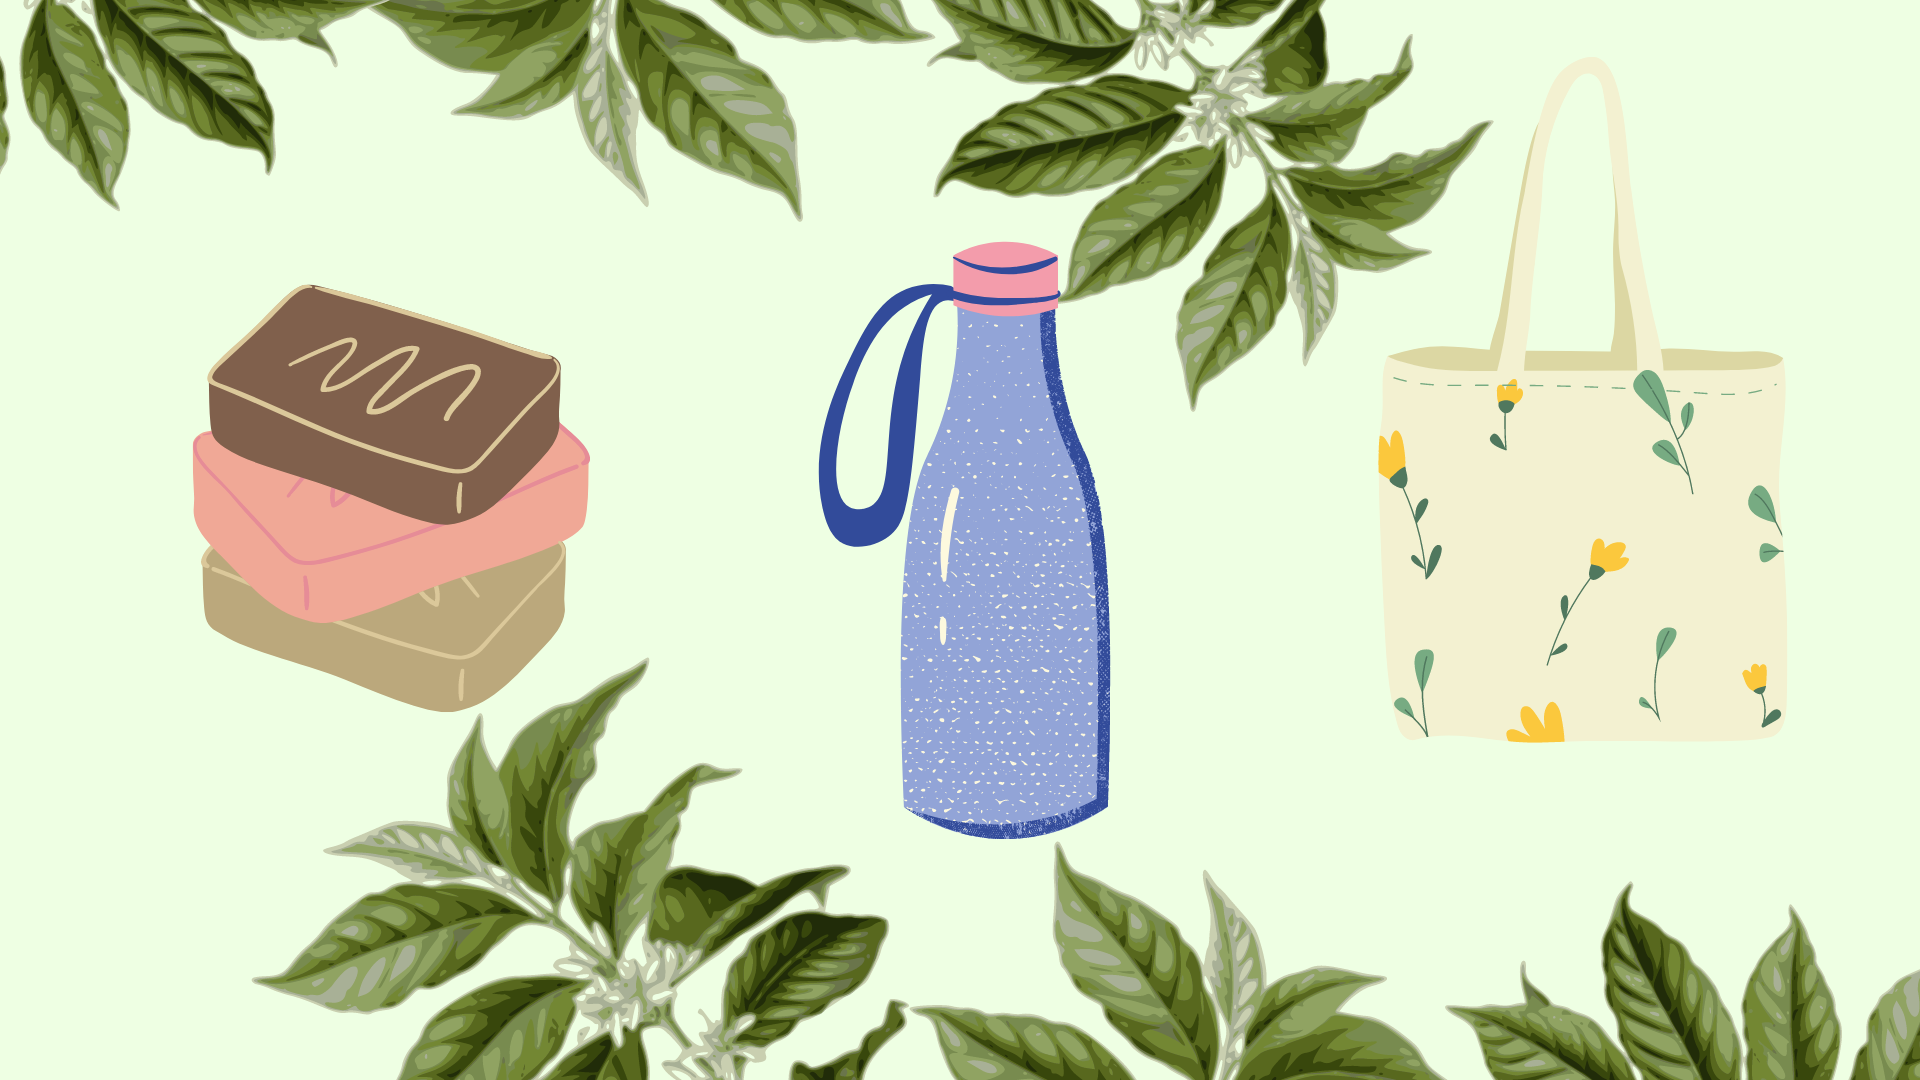 Green background with drawings of bars of soap, water bottle, and bag